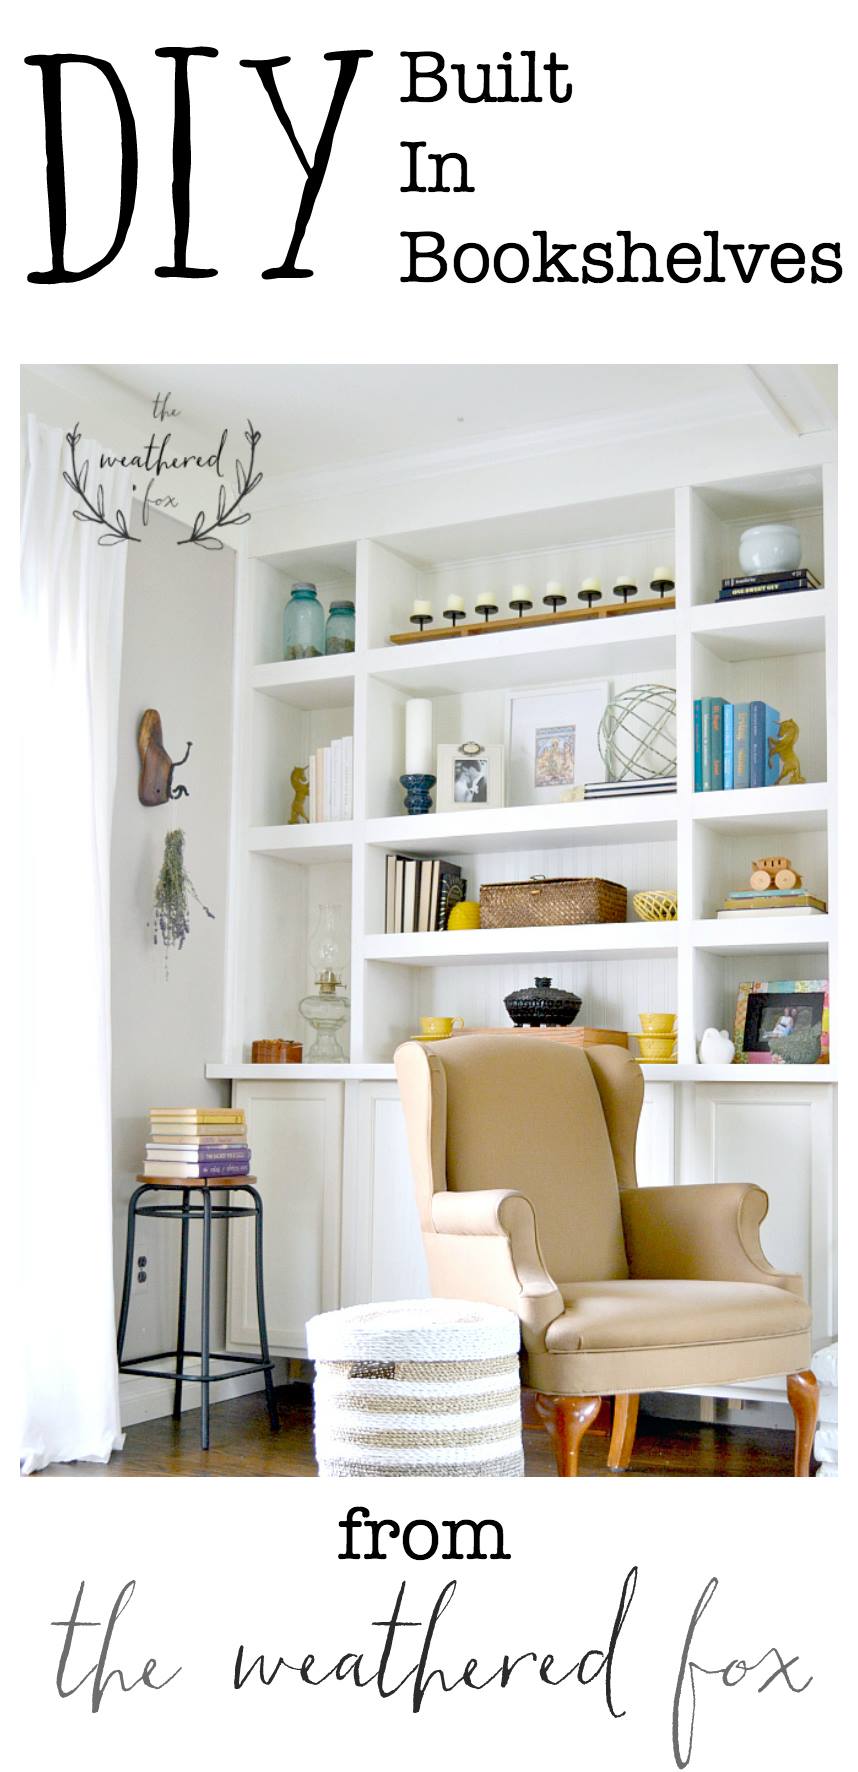 Built Ins DIY. Seriously the easiest tutorial I have found for DIY Built In Bookshelves. She even gives her supply list for this #DIY #Built In #Bookshelf #tutorial theweatheredfox.com